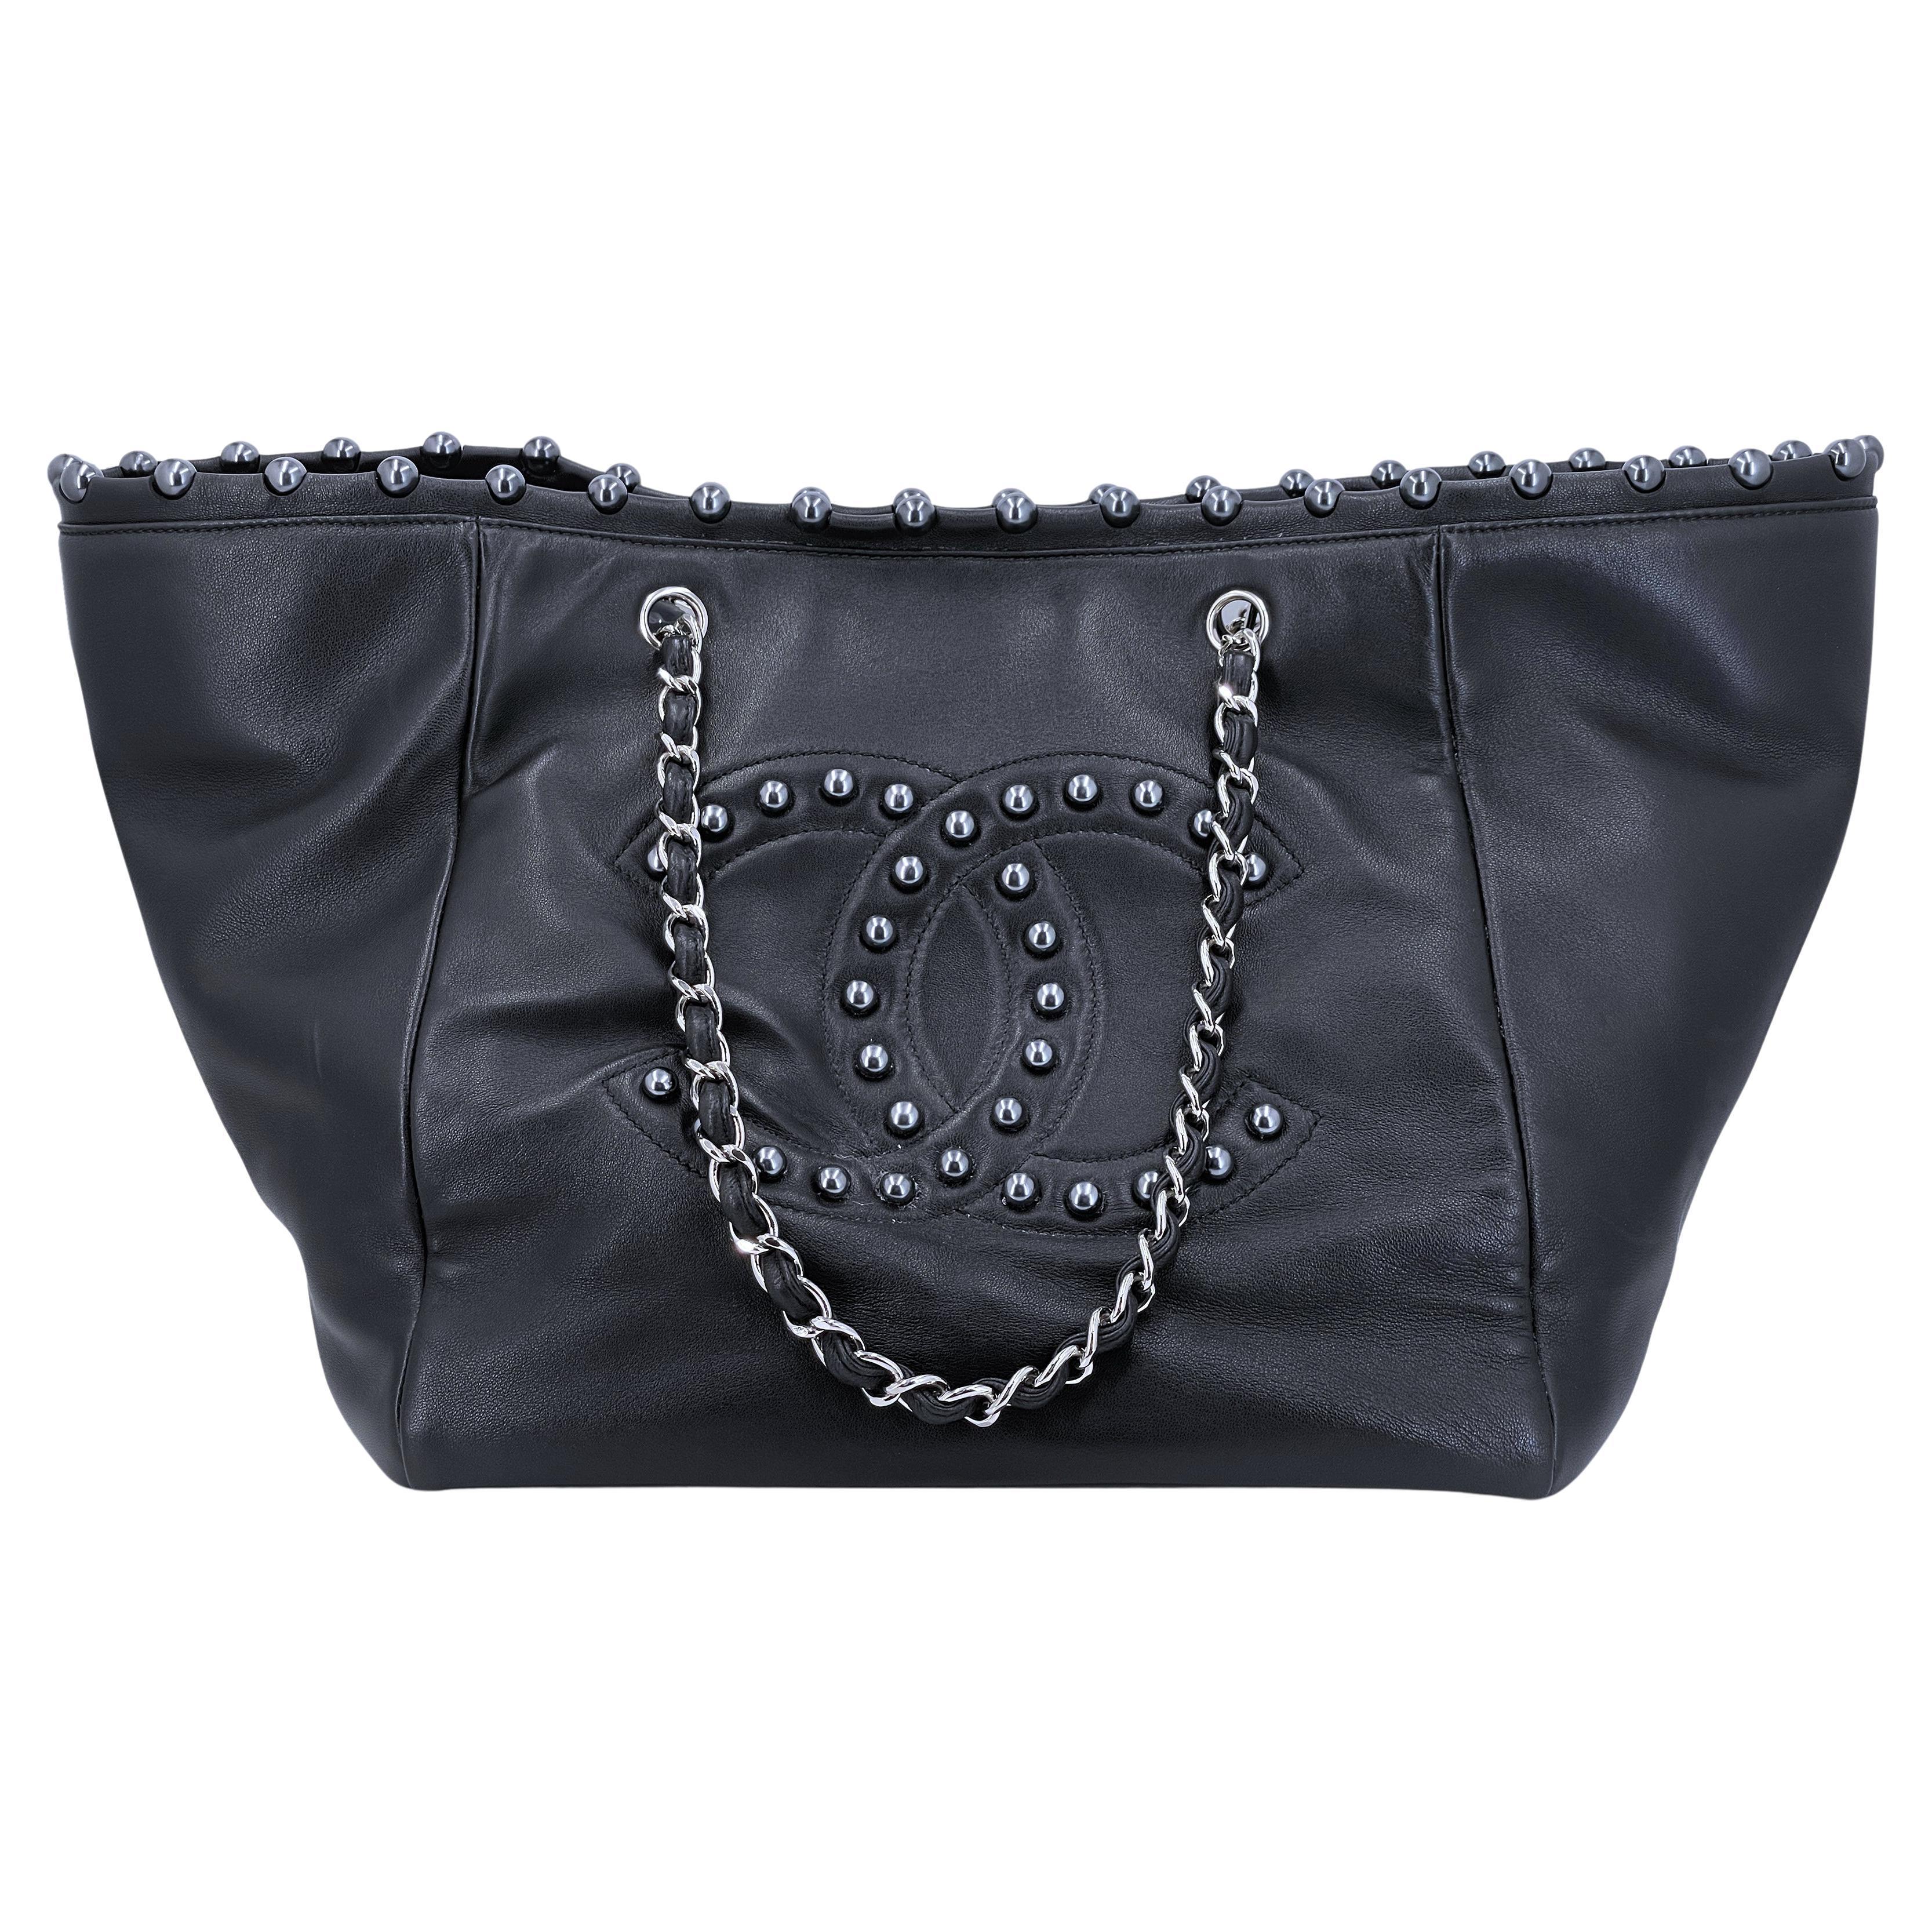 Black Chanel Limited Edition Large CC Pearl Lambskin Tote Iridescent Blue Pearls For Sale